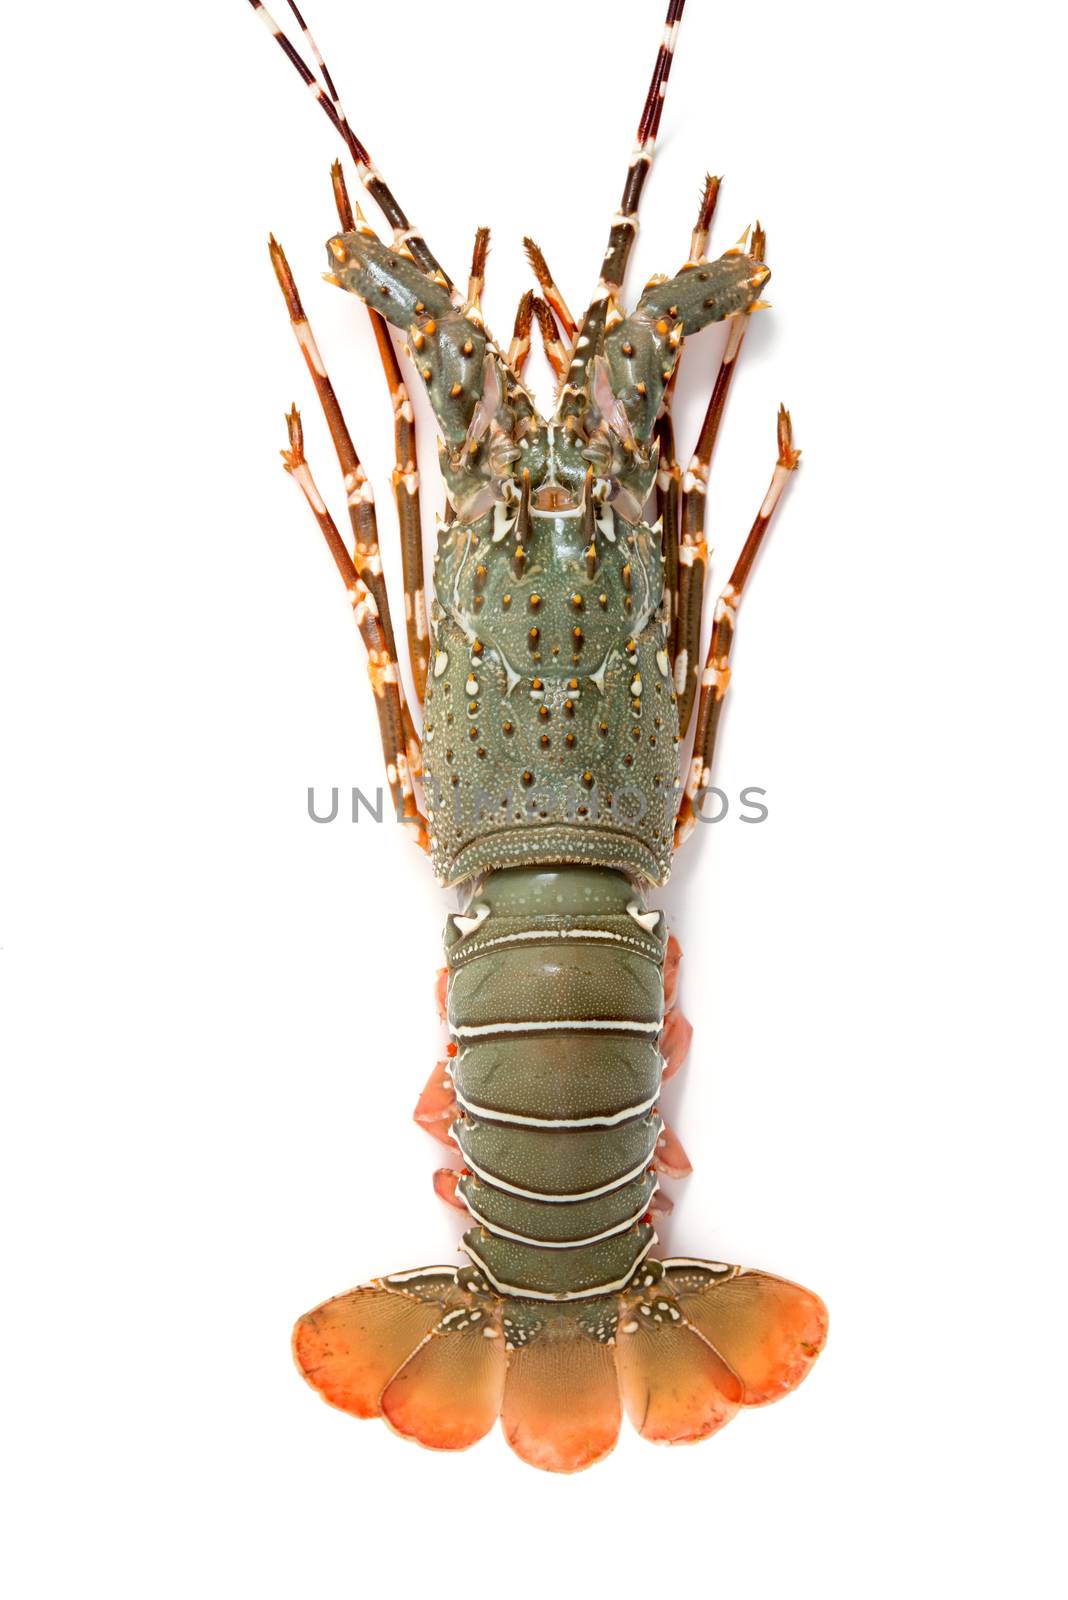 lobster isolated on white background by antpkr